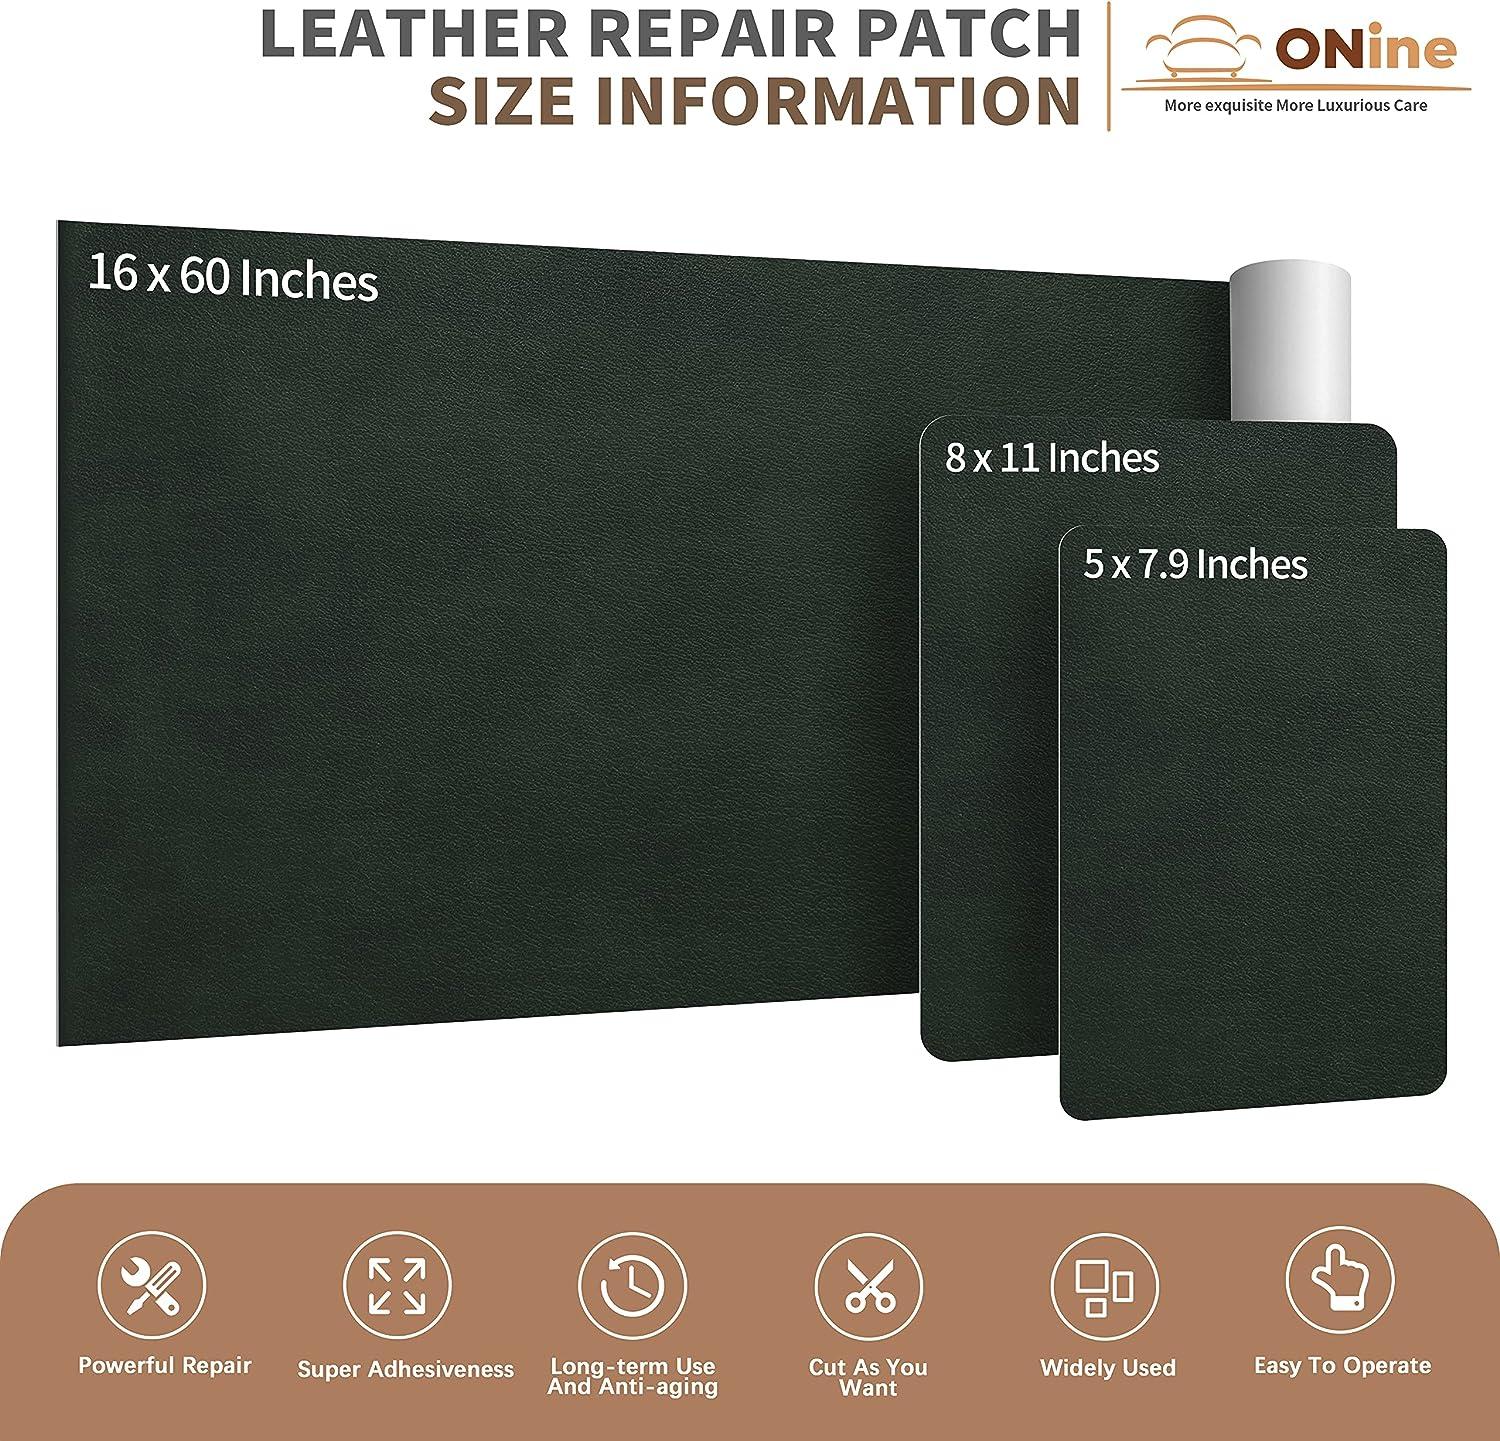  ONine Leather Repair Tape, Leather Repair Patch, 16 x